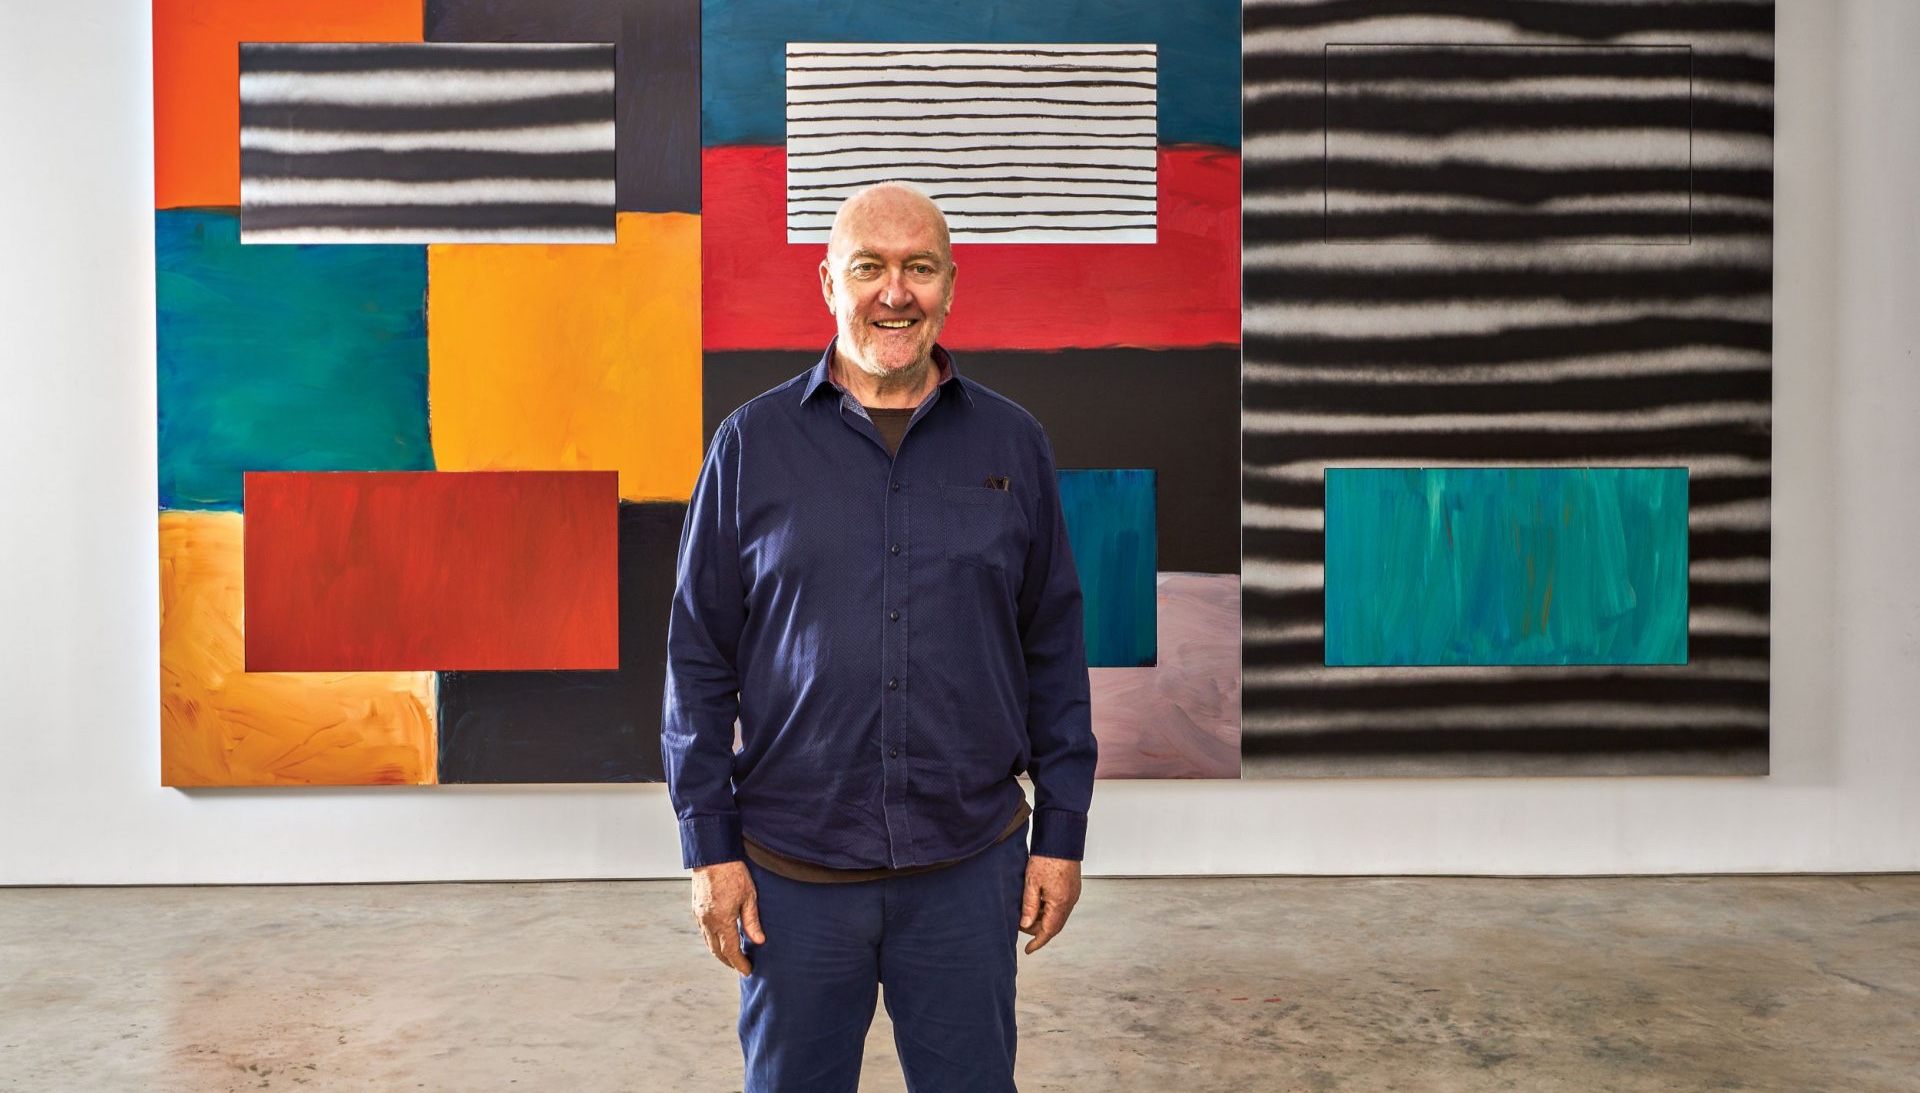 Artwork of Sean Scully finally exhibited in Poland